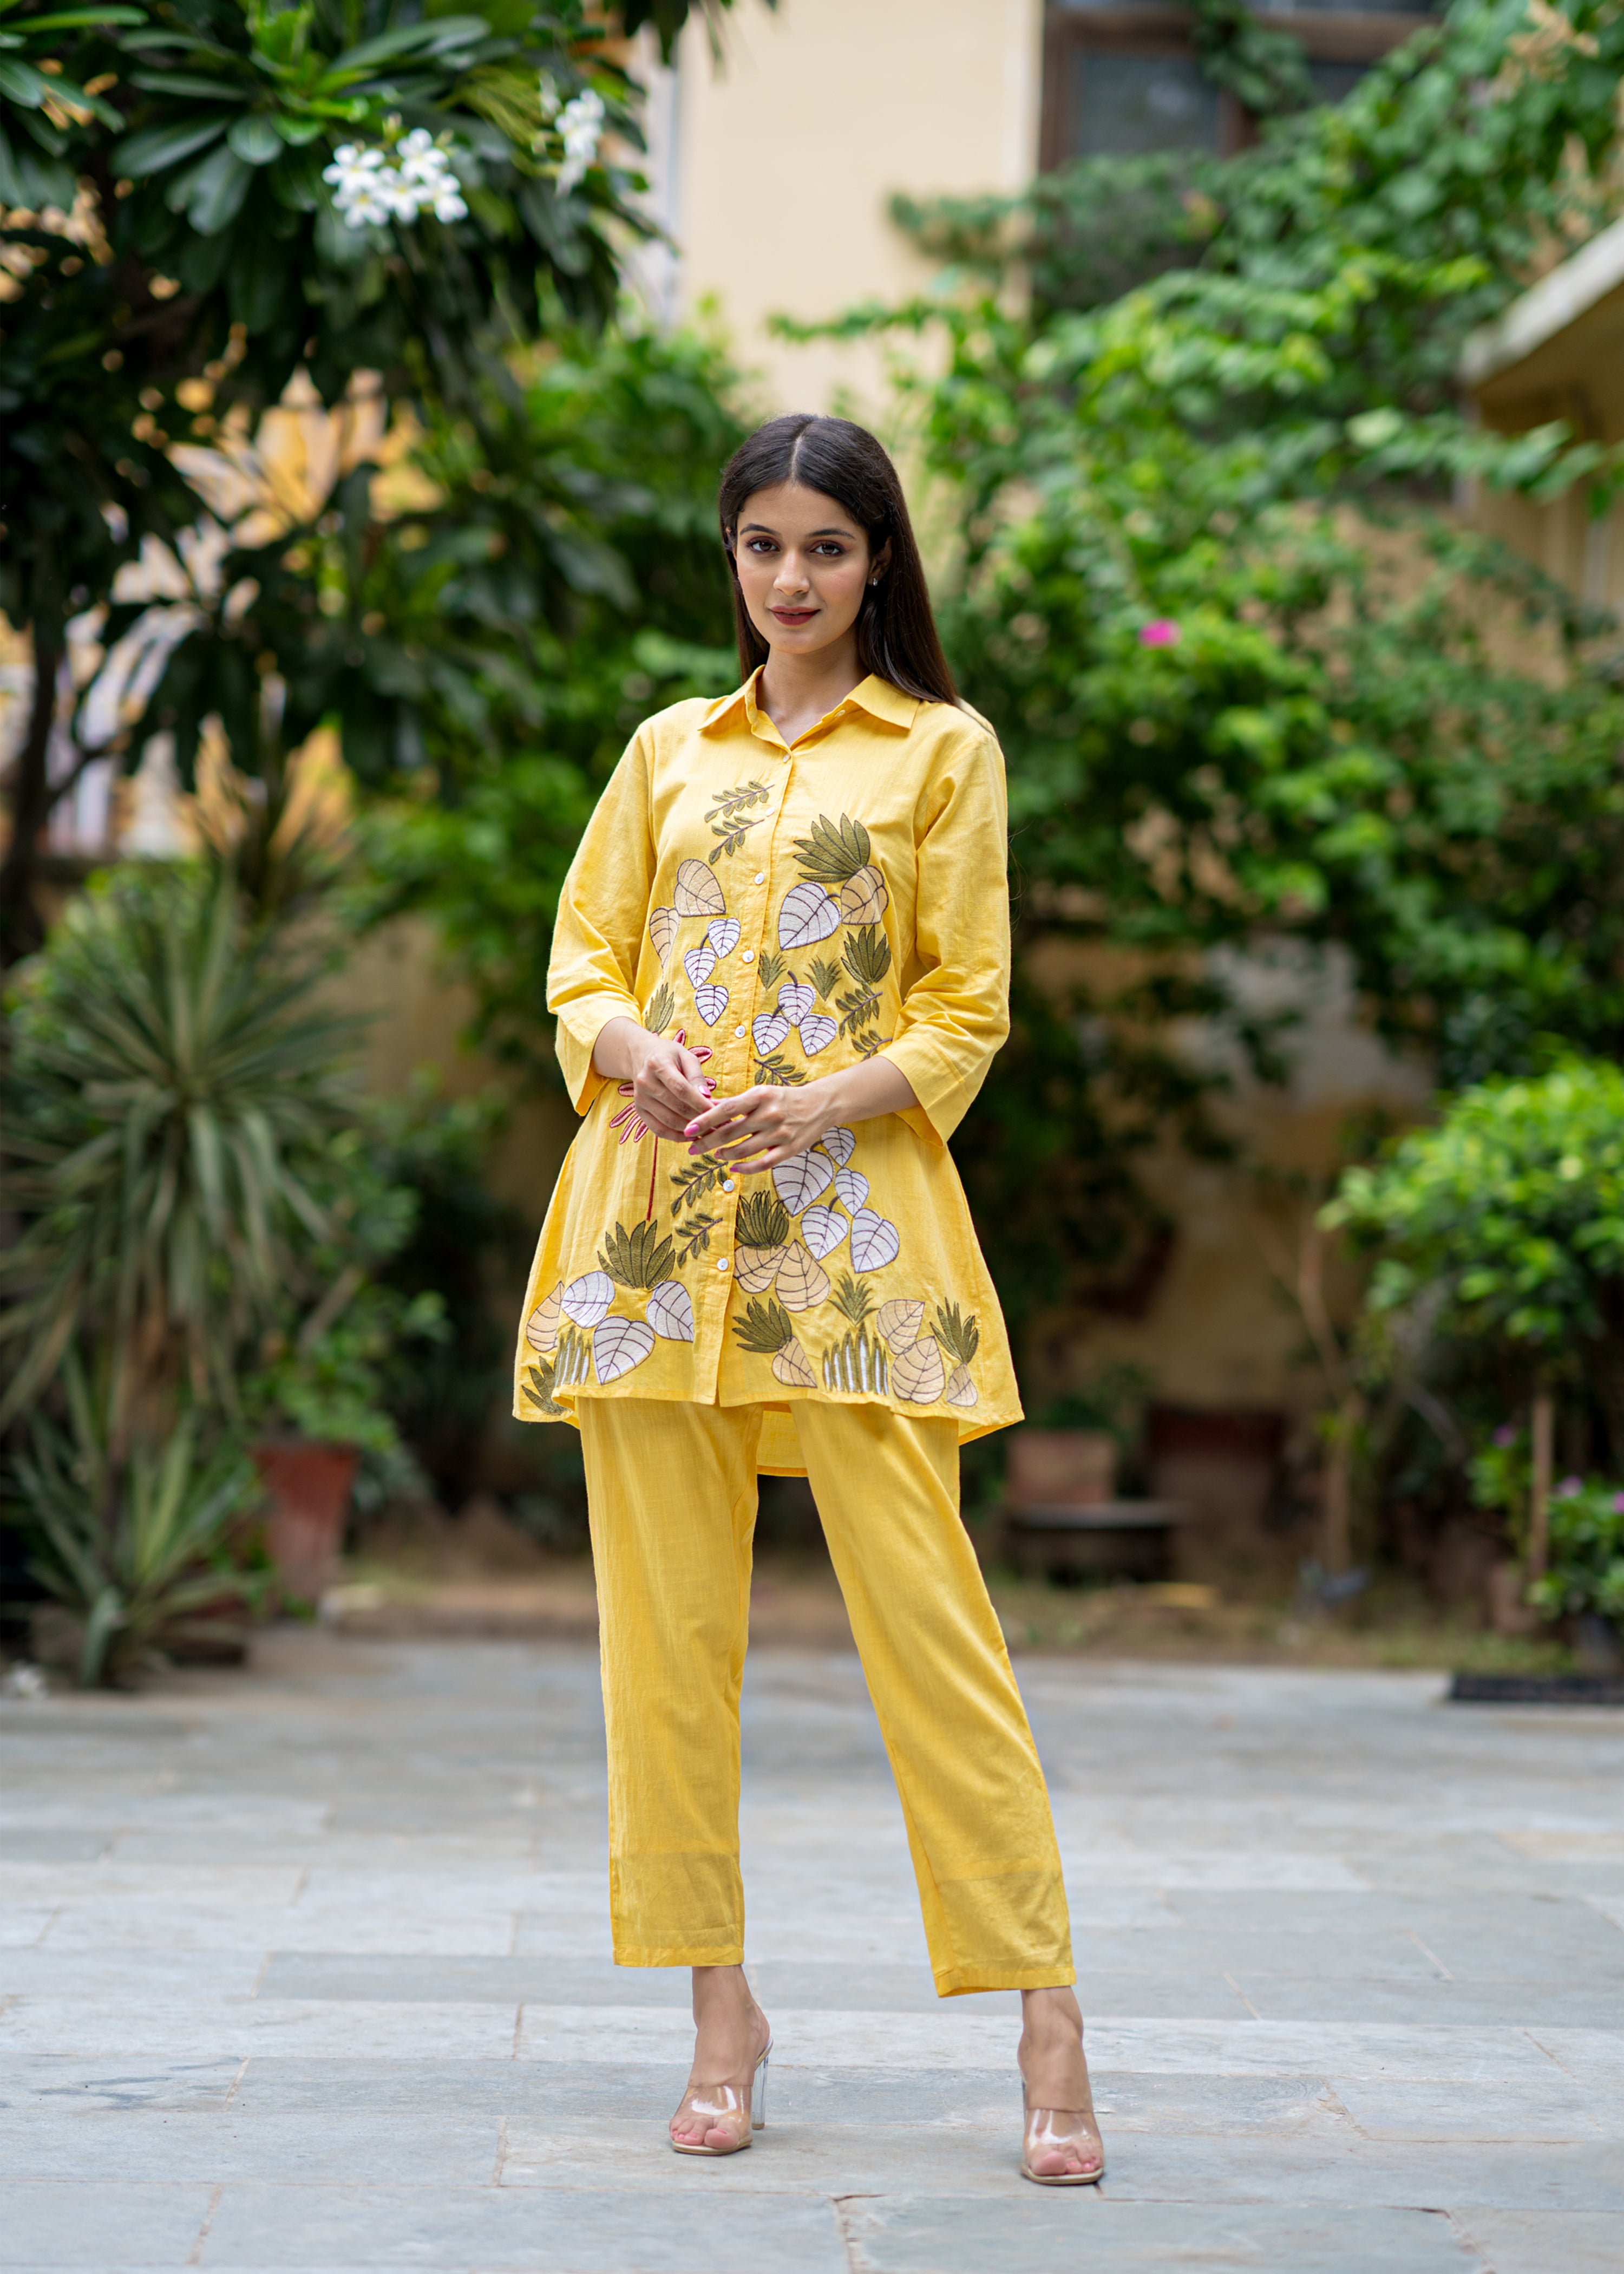 Stylish Co-ord Sets for Women Online in India - Shop Now at Kaftanize